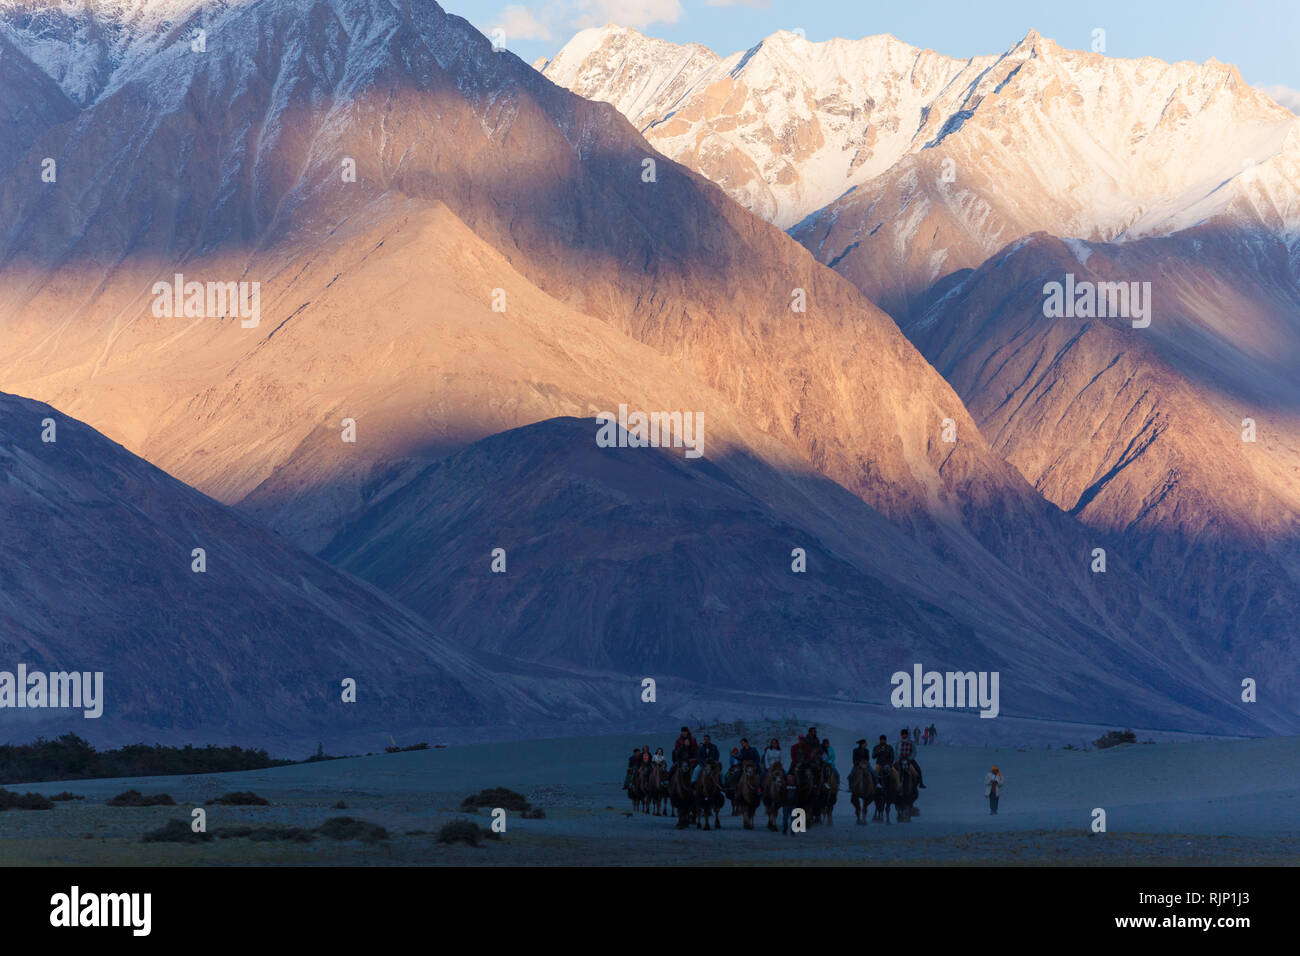 Tourists riding bactrian camels in the beautiful sunset scenery in the area of sand dunes near Hunder, Nubra Valley, Ladakh, Jammu and Kashmir, India Stock Photo